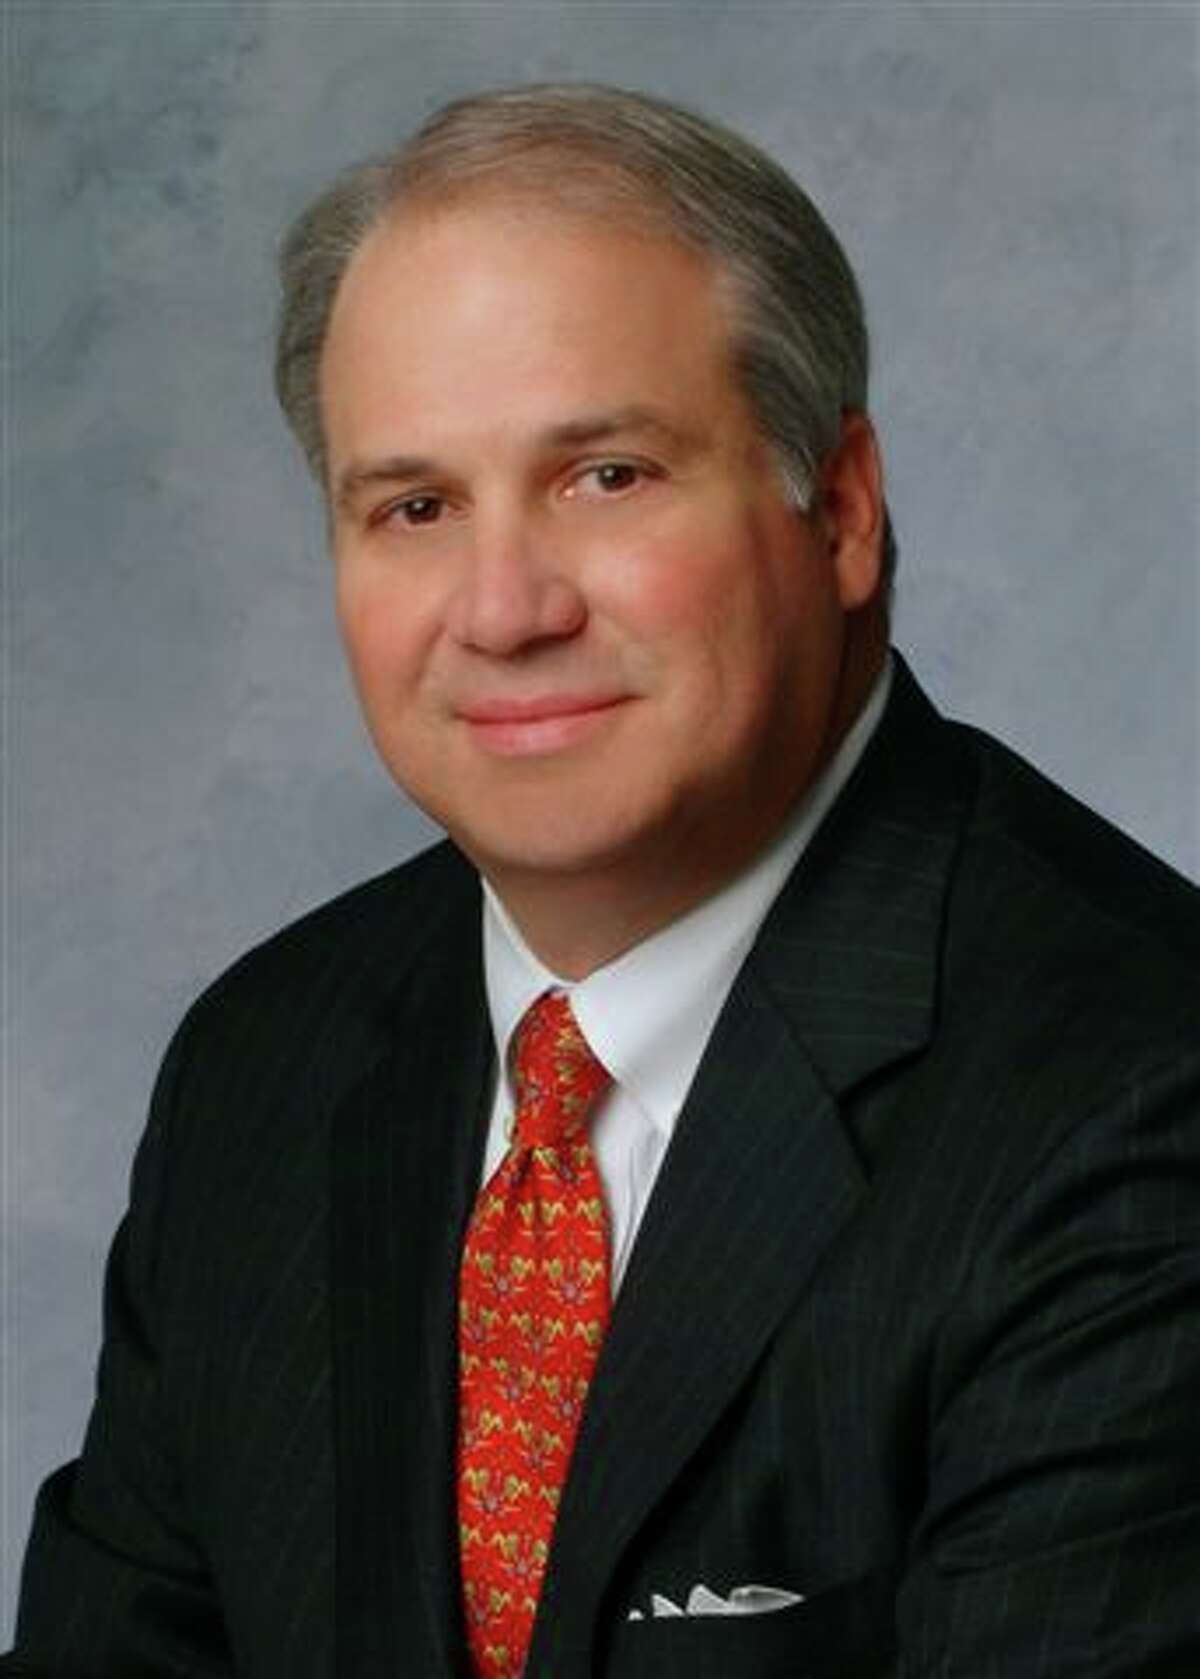 Bill Wilson has been promoted to Houston region chairman of Texas Capital Bank.